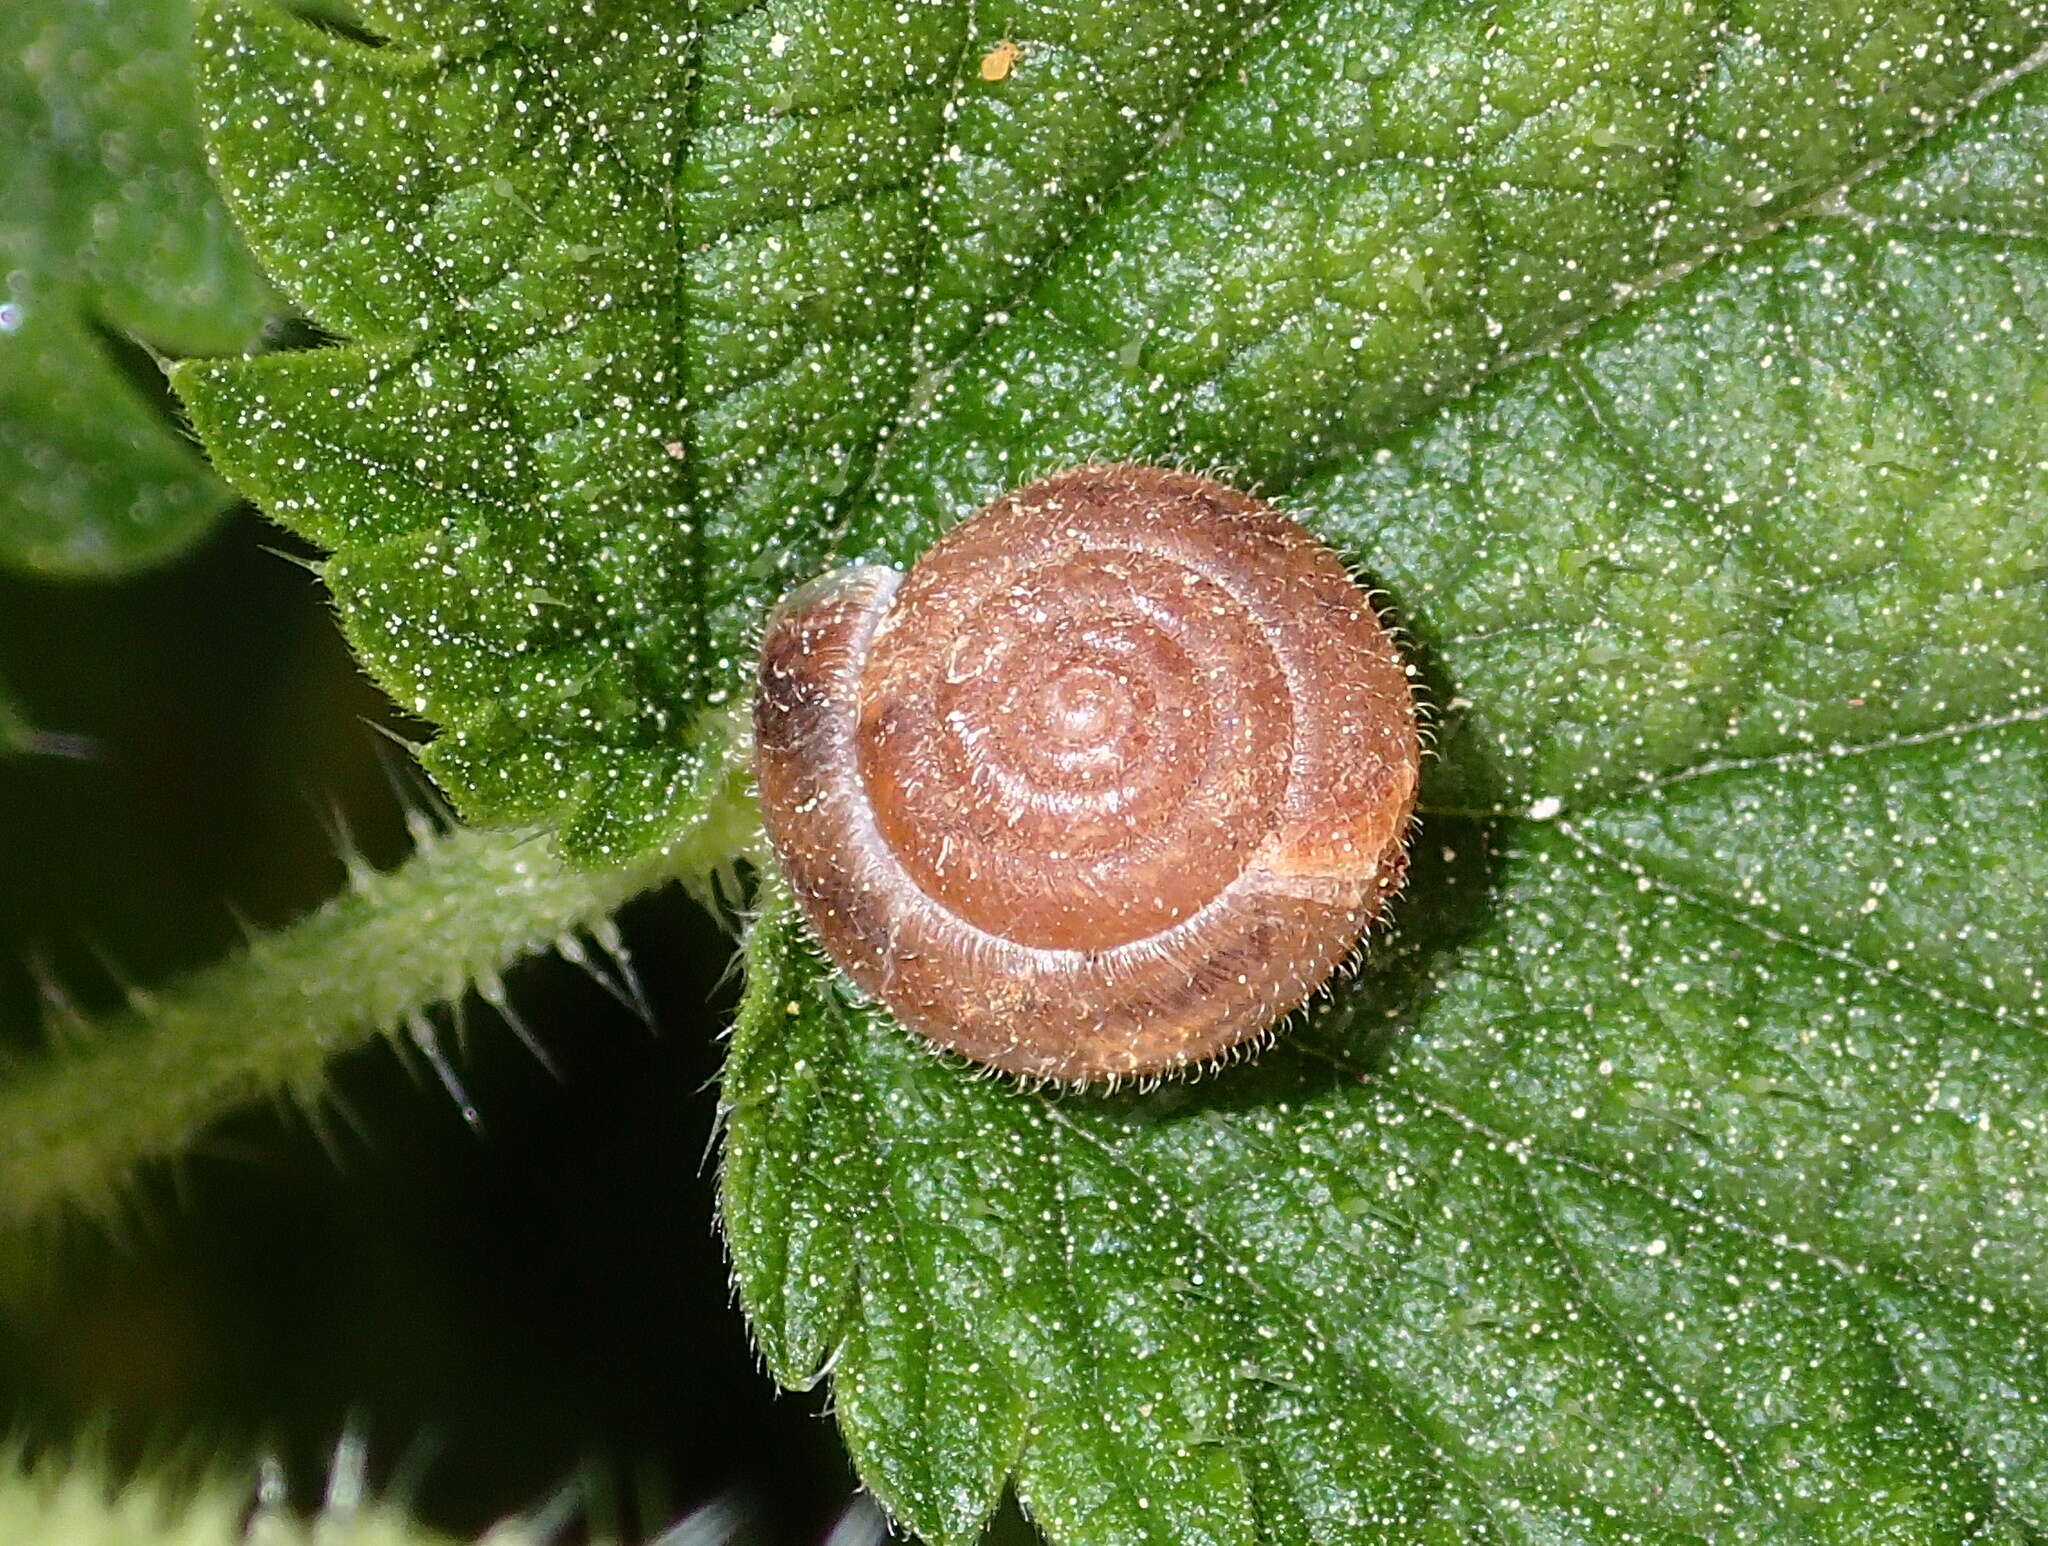 Image of Hairy Snail